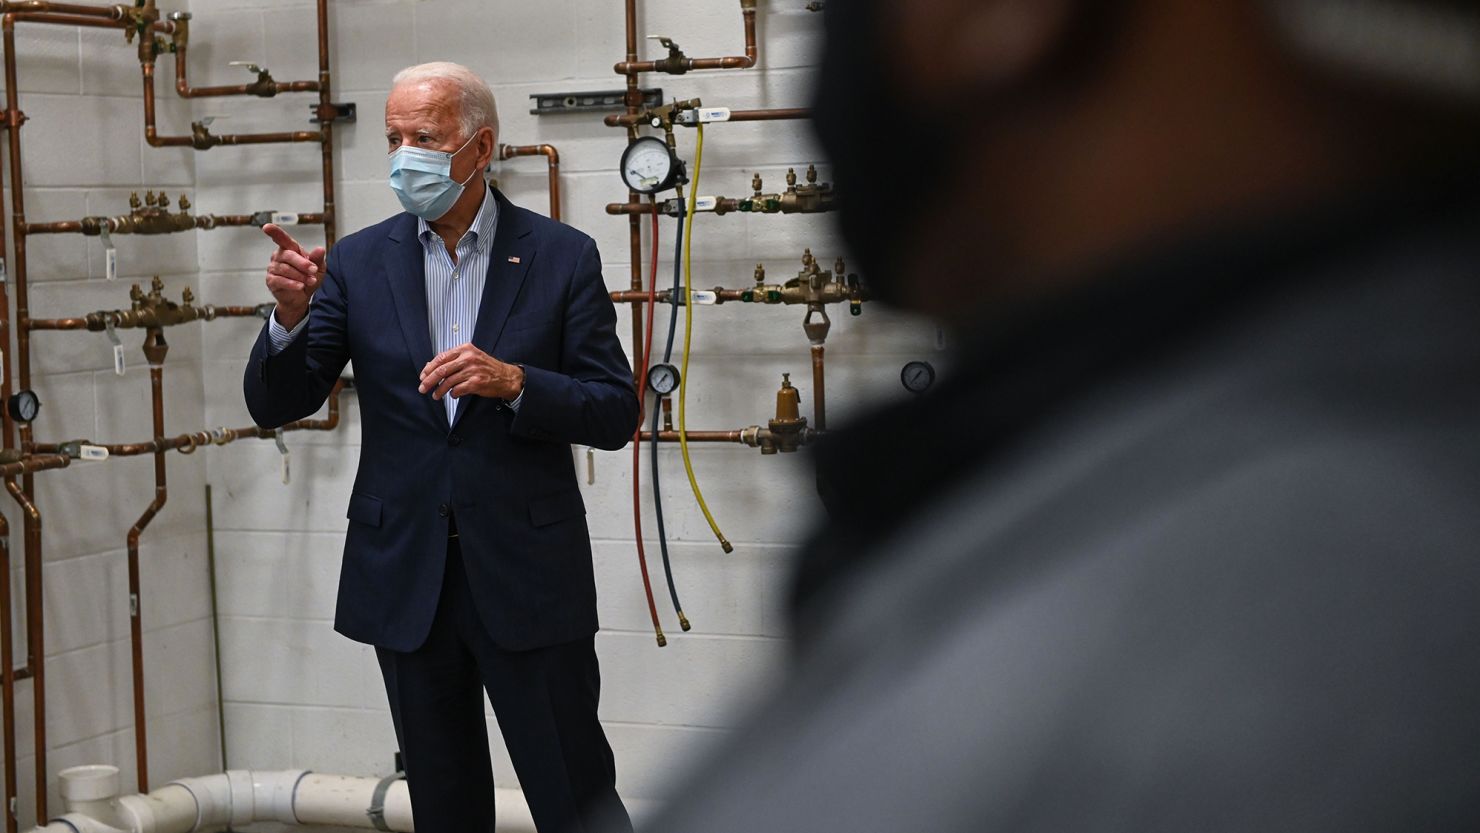 Democratic presidential nominee and former Vice President Joe Biden tours a local plumbers union training center in Erie, Pennsylvania on October 10, 2020. 